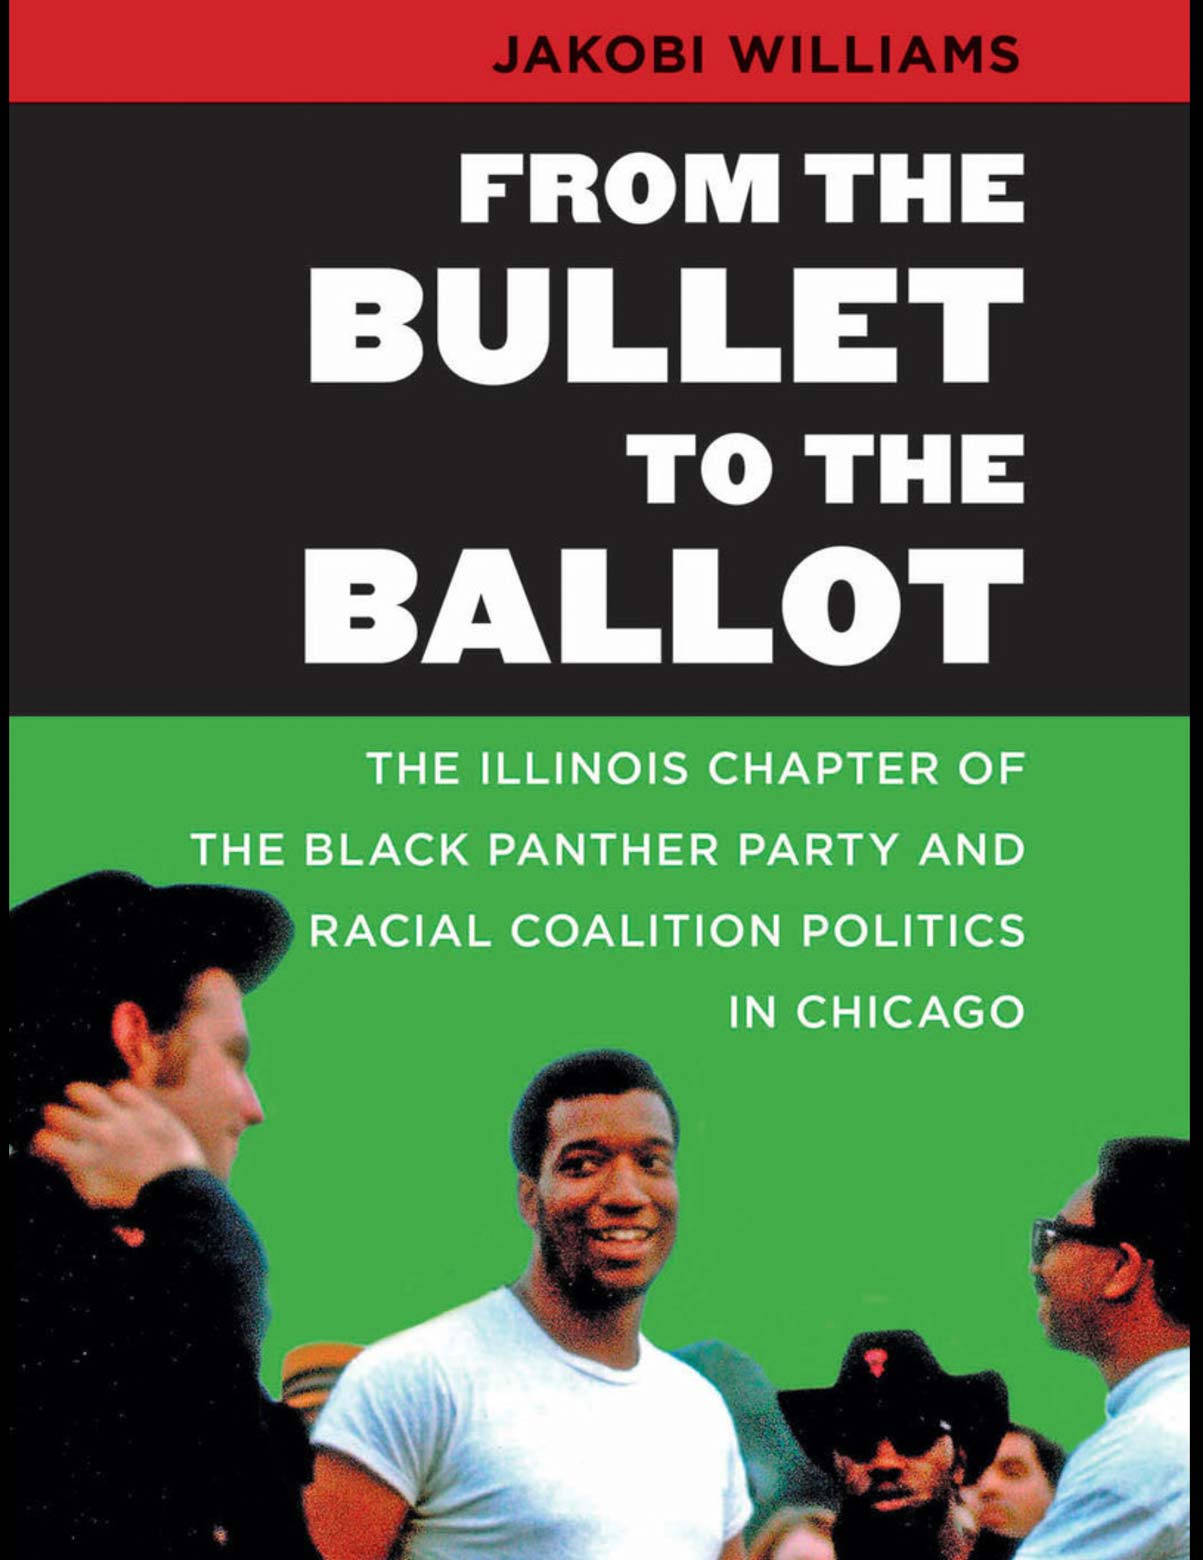 From the Bullet to the Ballot: The Illinois Chapter of the Black Panther Party and Racial Coalition Politics in Chicago